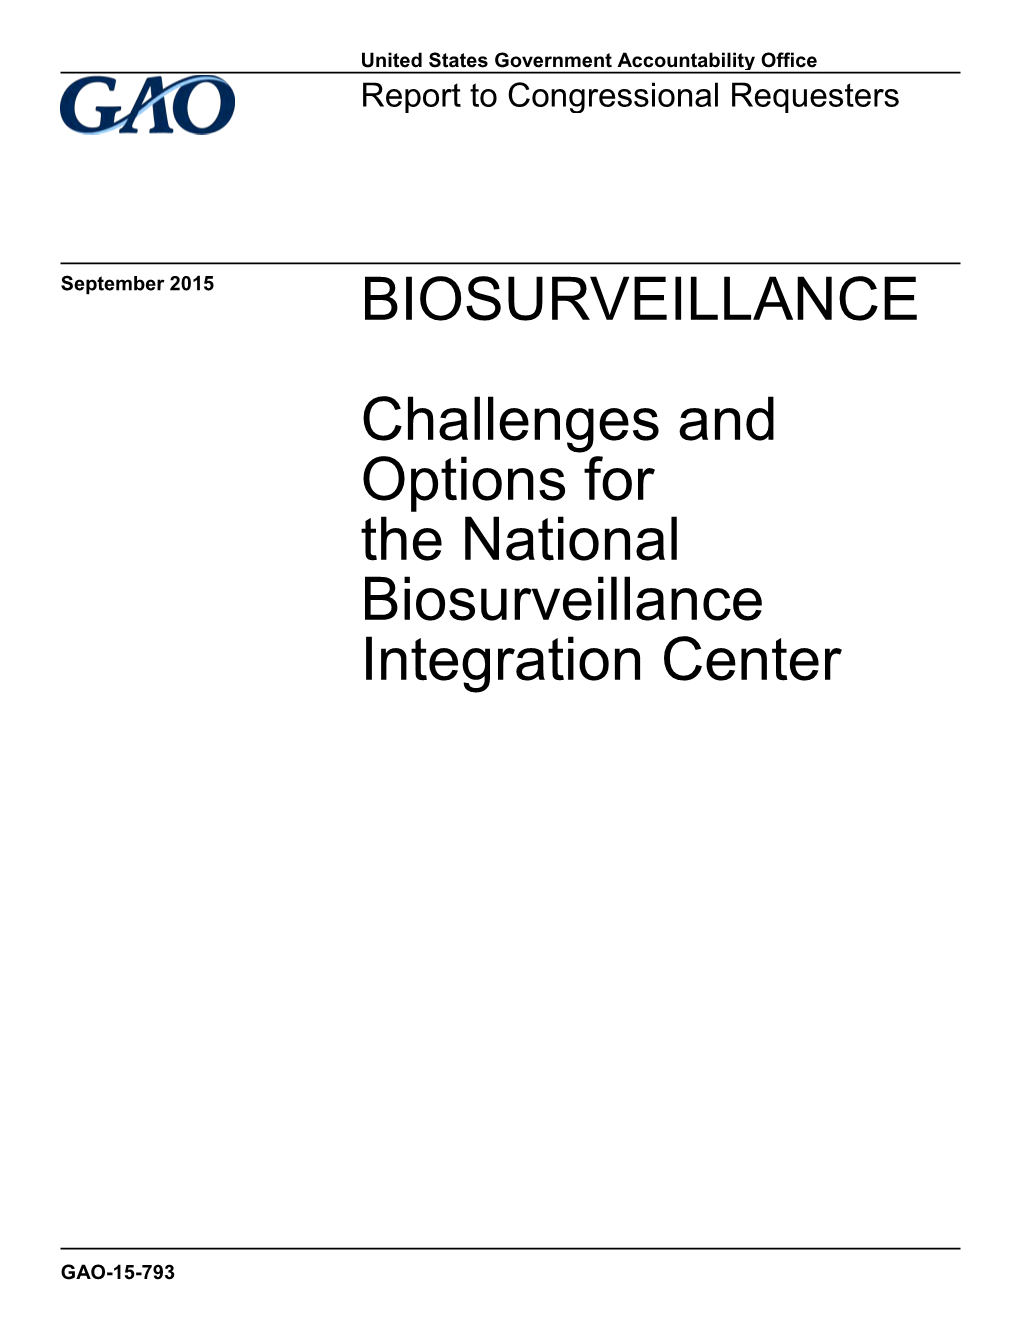 Challenges and Options for the National Biosurveillance Integration Center